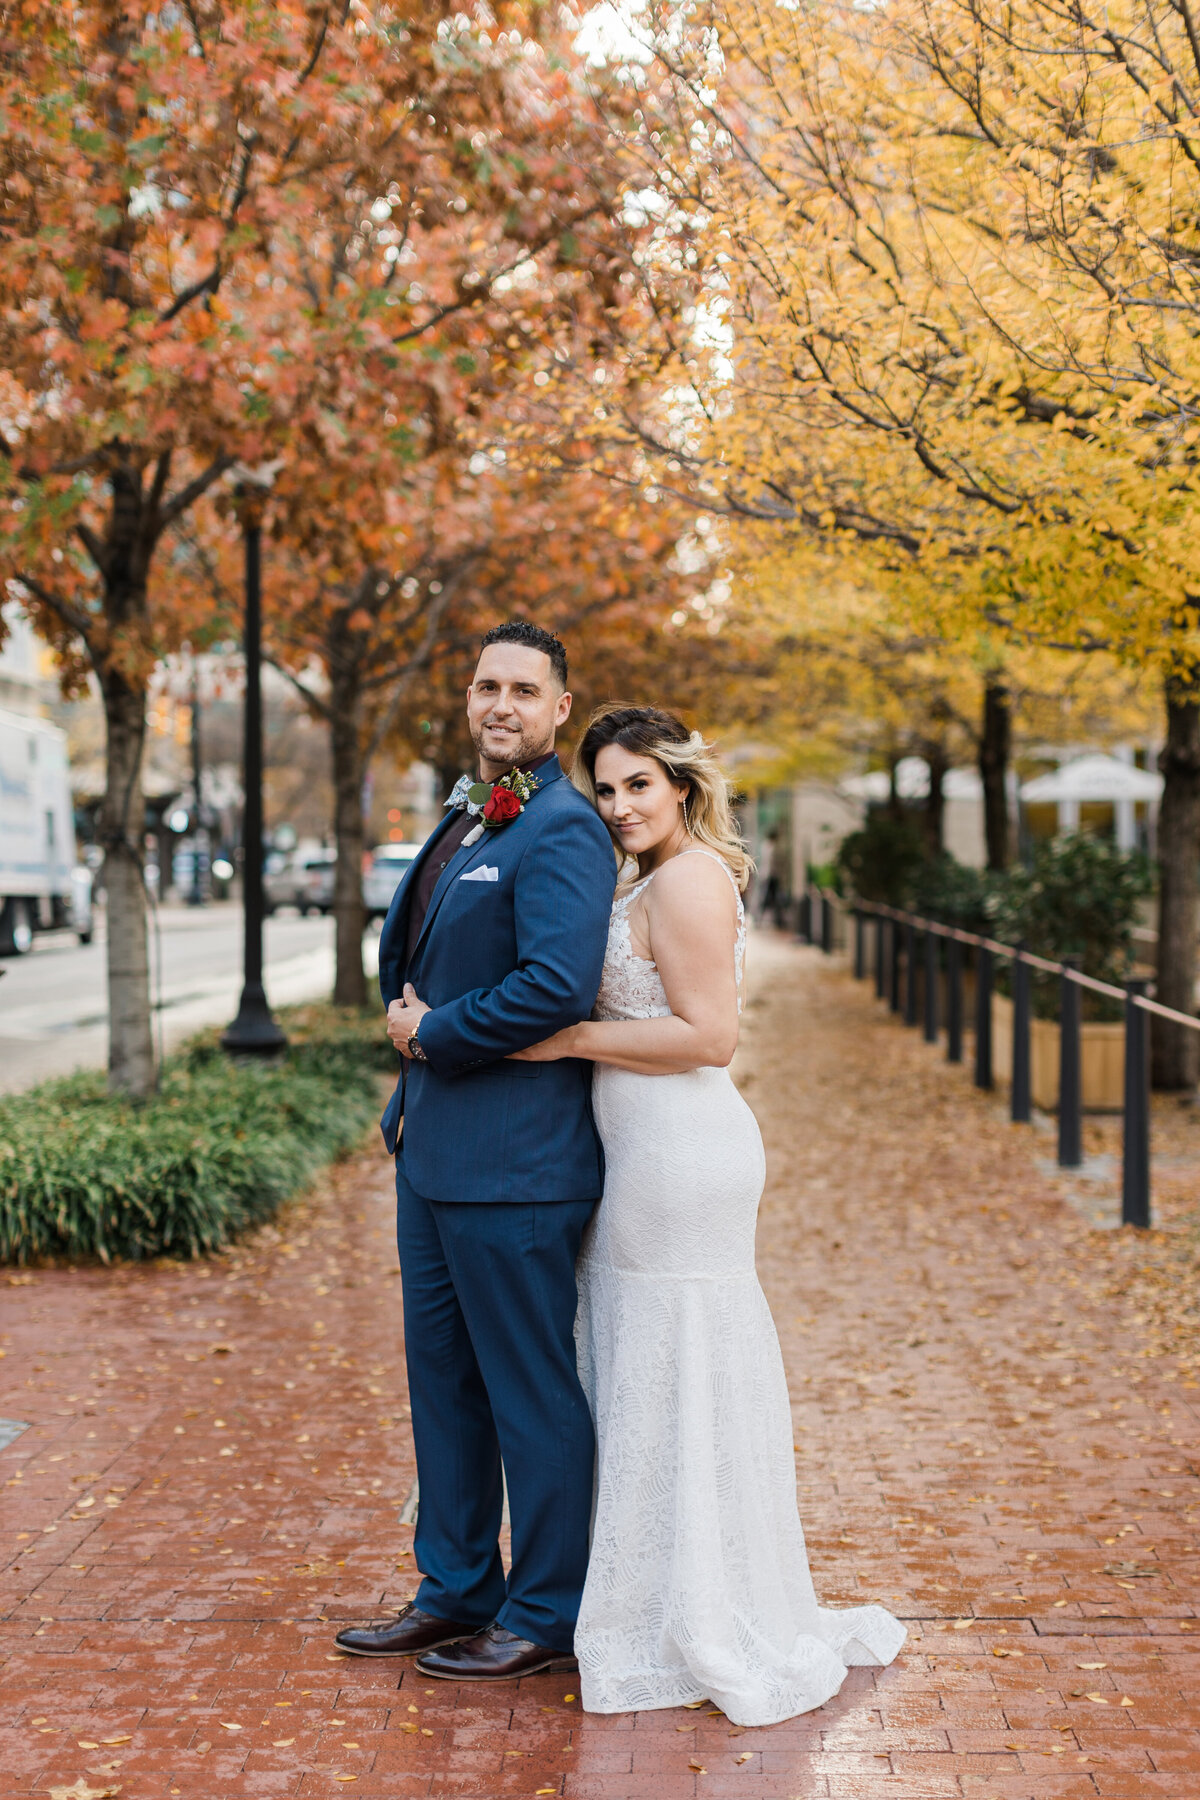 Portrait of a bride and groom posing in downtown Fort Worth after their elopement ceremony at the Tarrant County Courthouse in Fort Worth, Texas. The bride is "the big spoon" while the groom is " the little spoon," and they are backed by many fall colors on the trees that frame the scene. The bride is on the right and is wearing a sleeveless, white dress. The groom is on the left and is wearing a navy suit with a boutonniere.